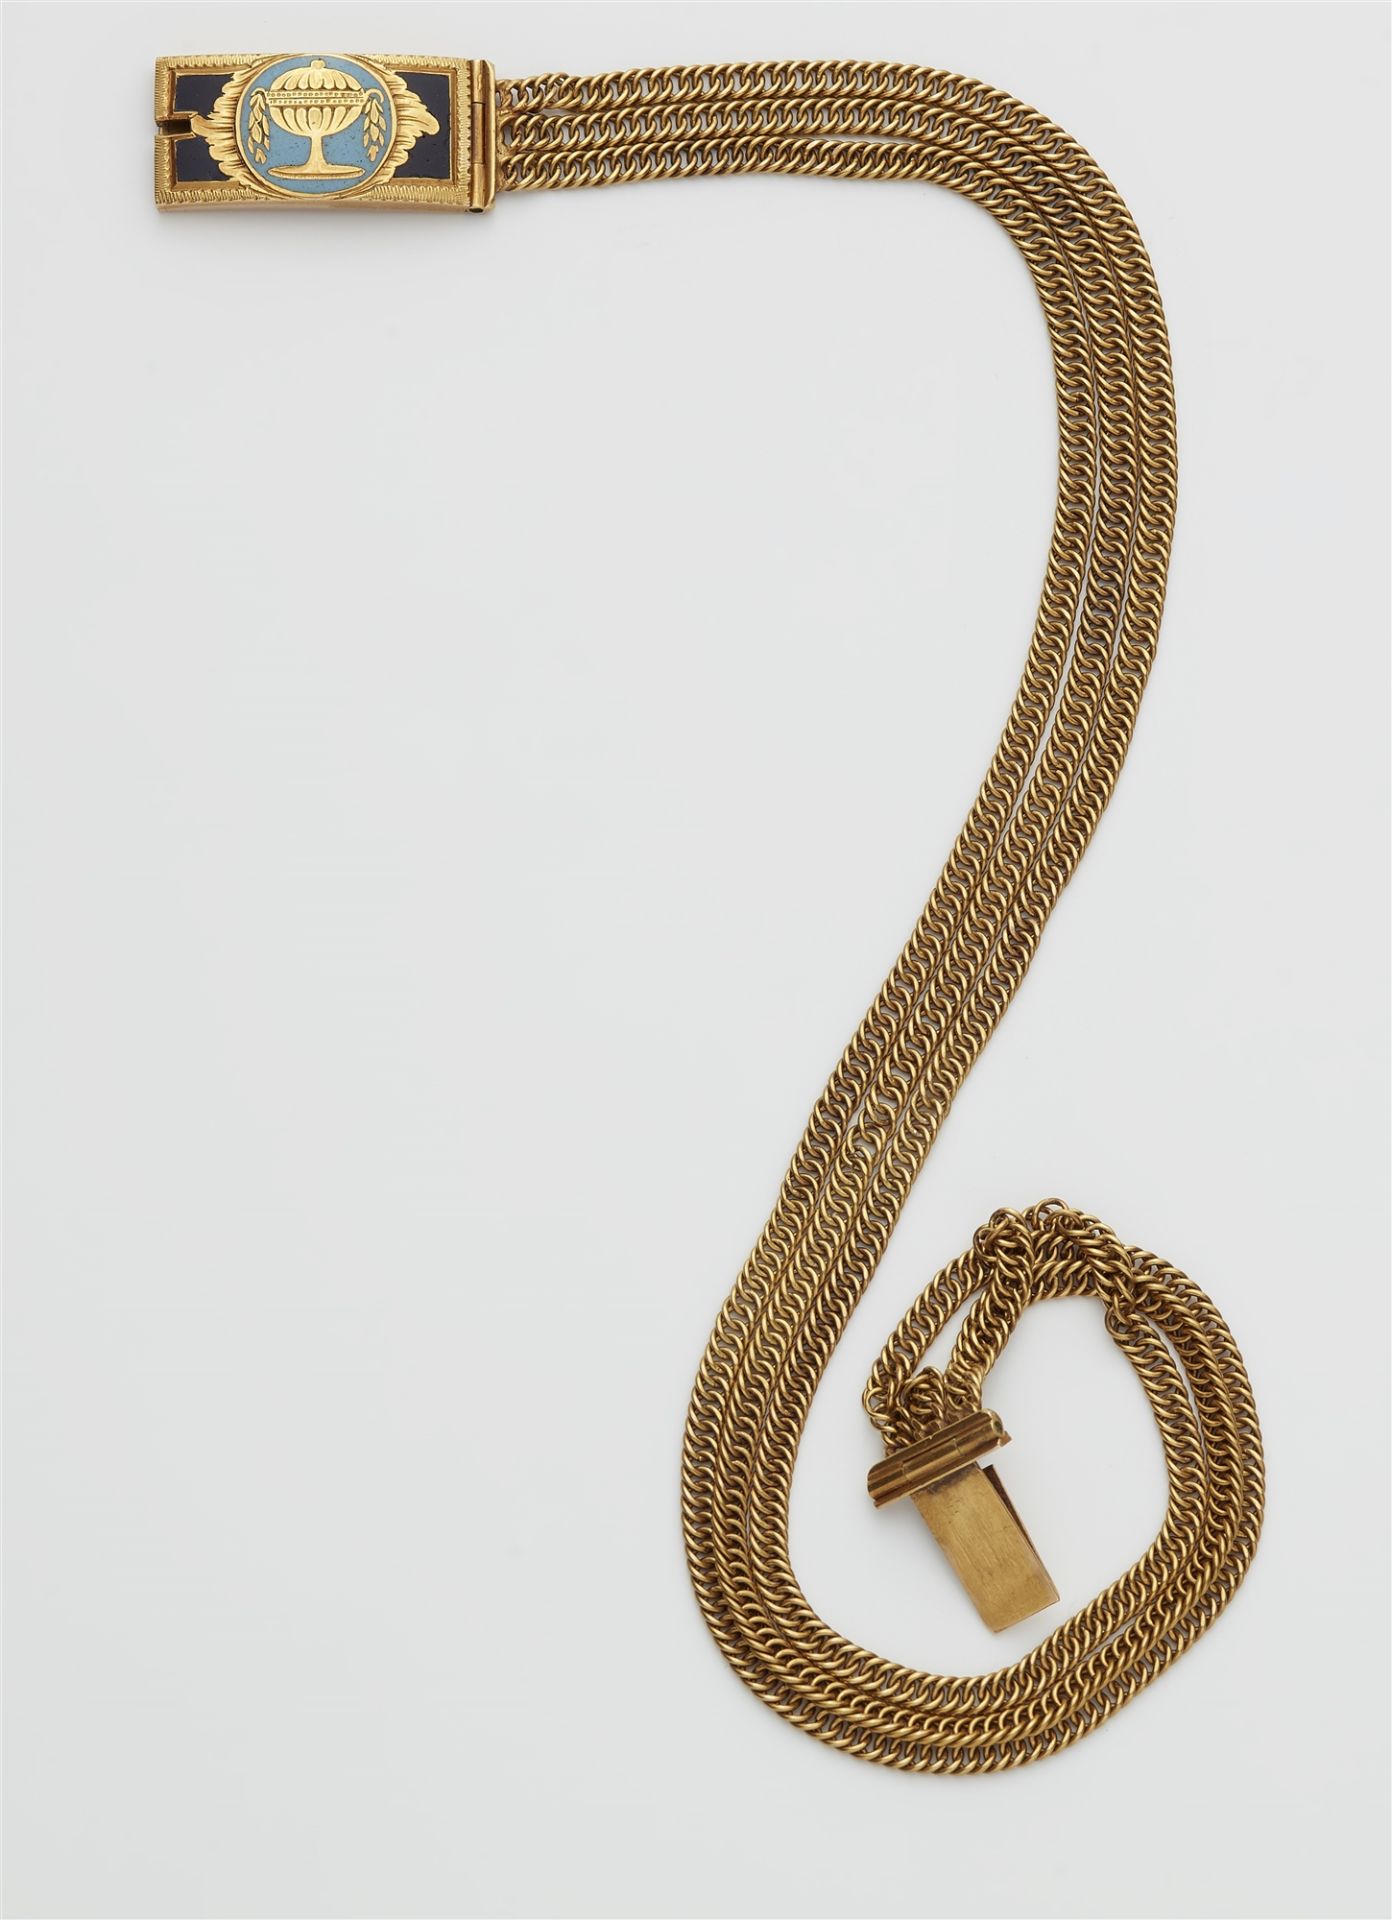 A George III 14k gold and enamel chain necklace.